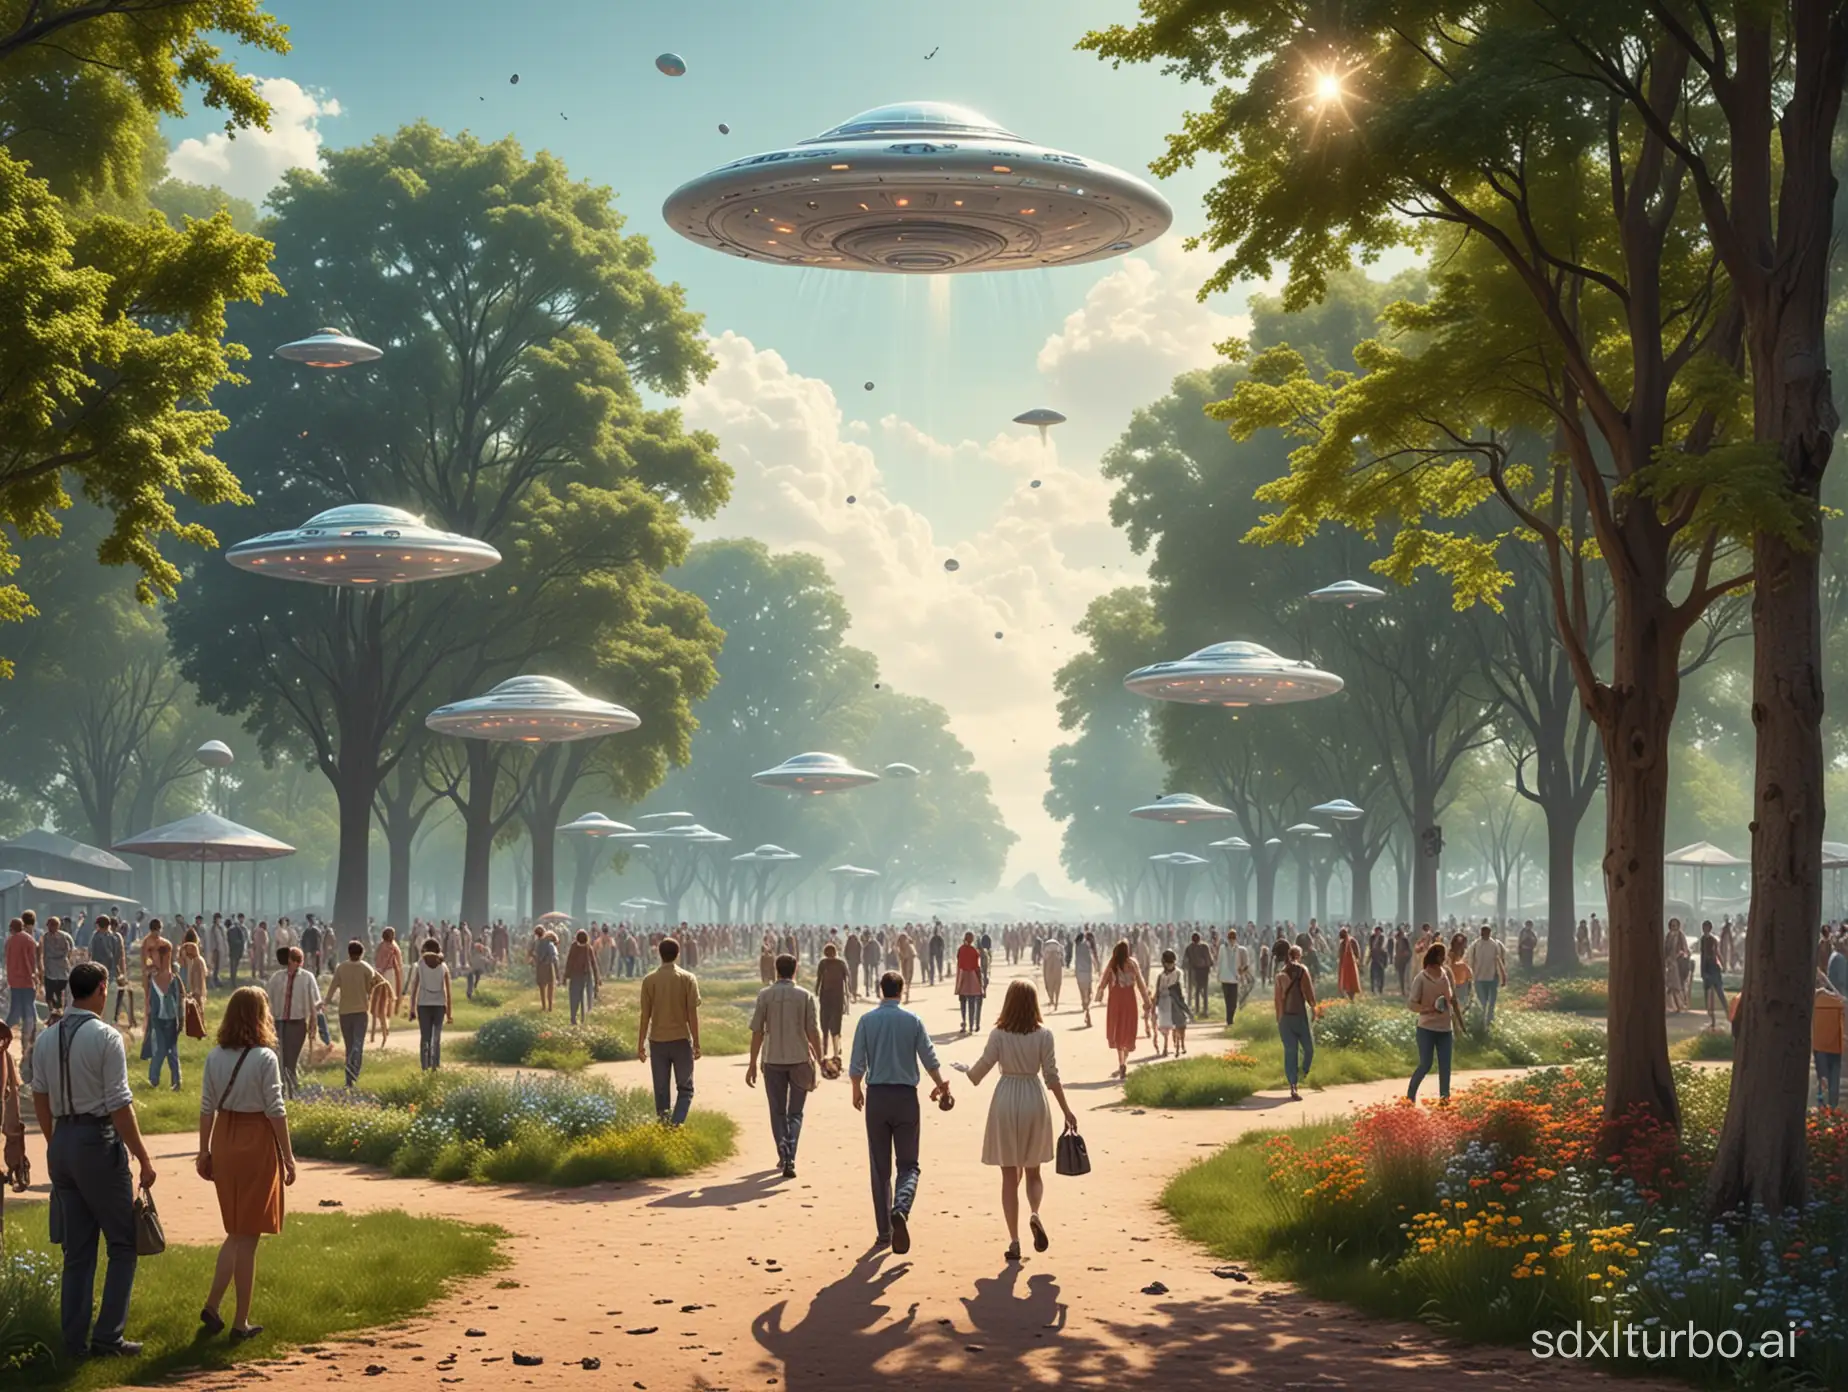 The park of the future with flying saucers and strolling people